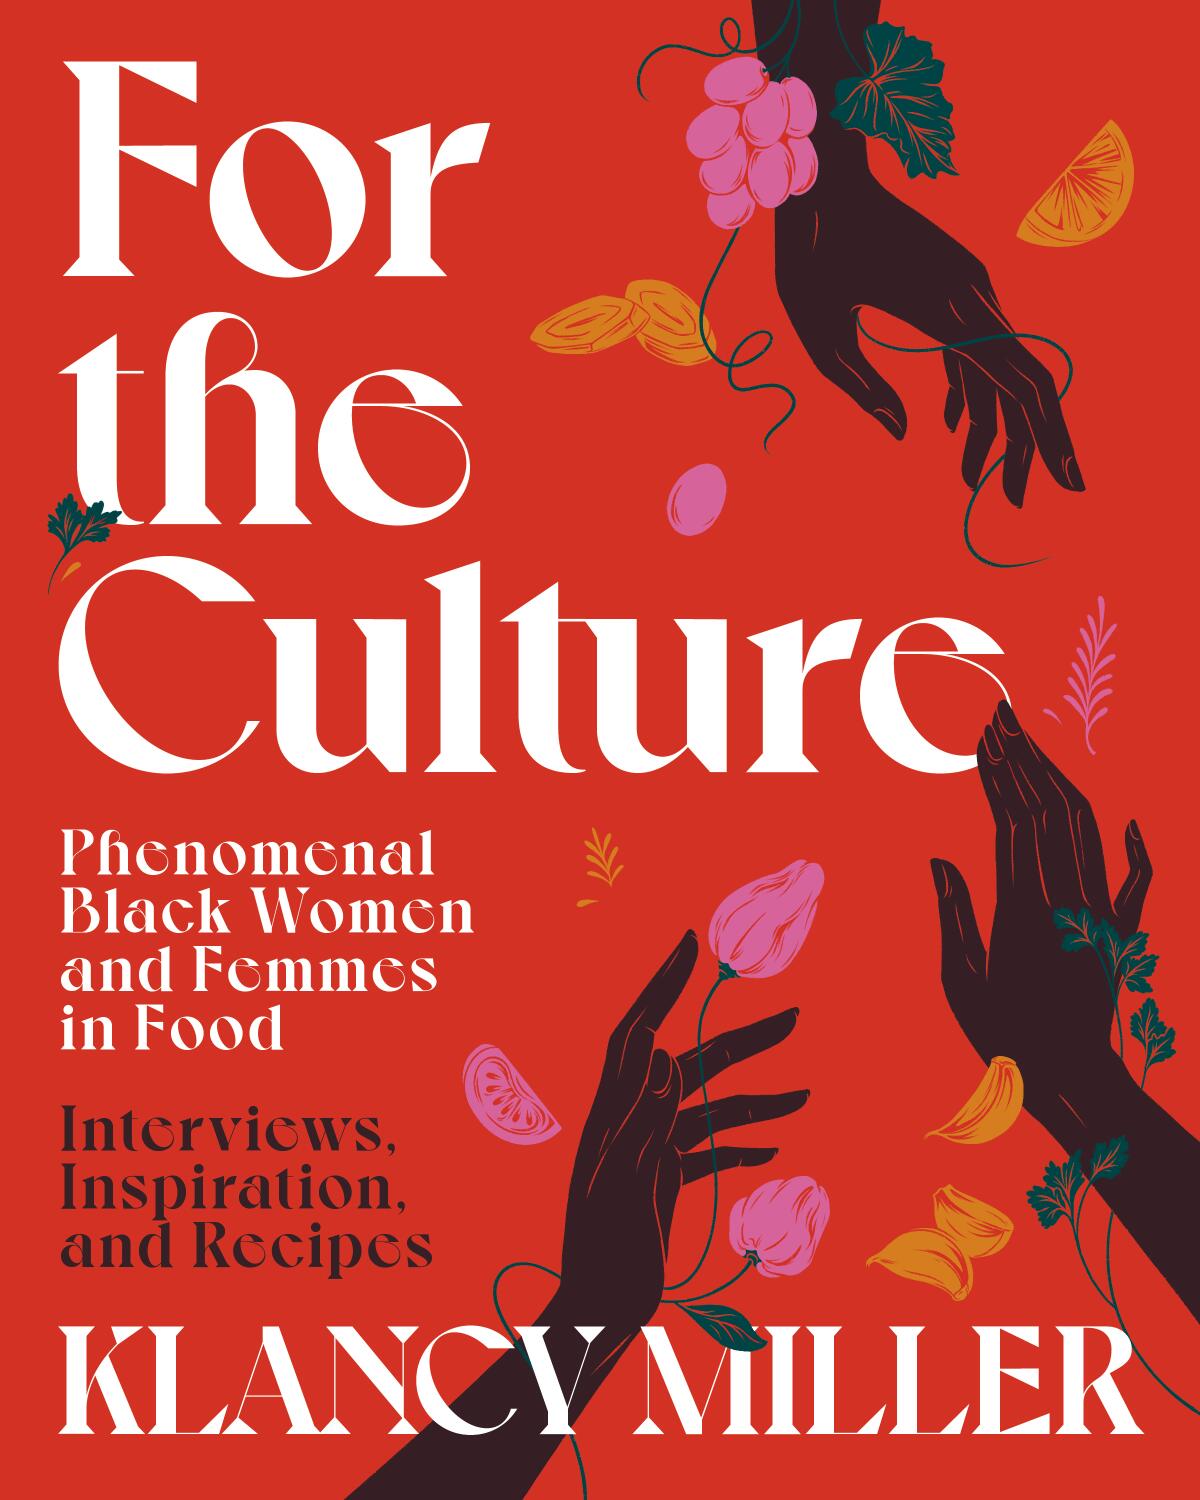 Cover of "For the Culture" cookbook by Klancy Miller